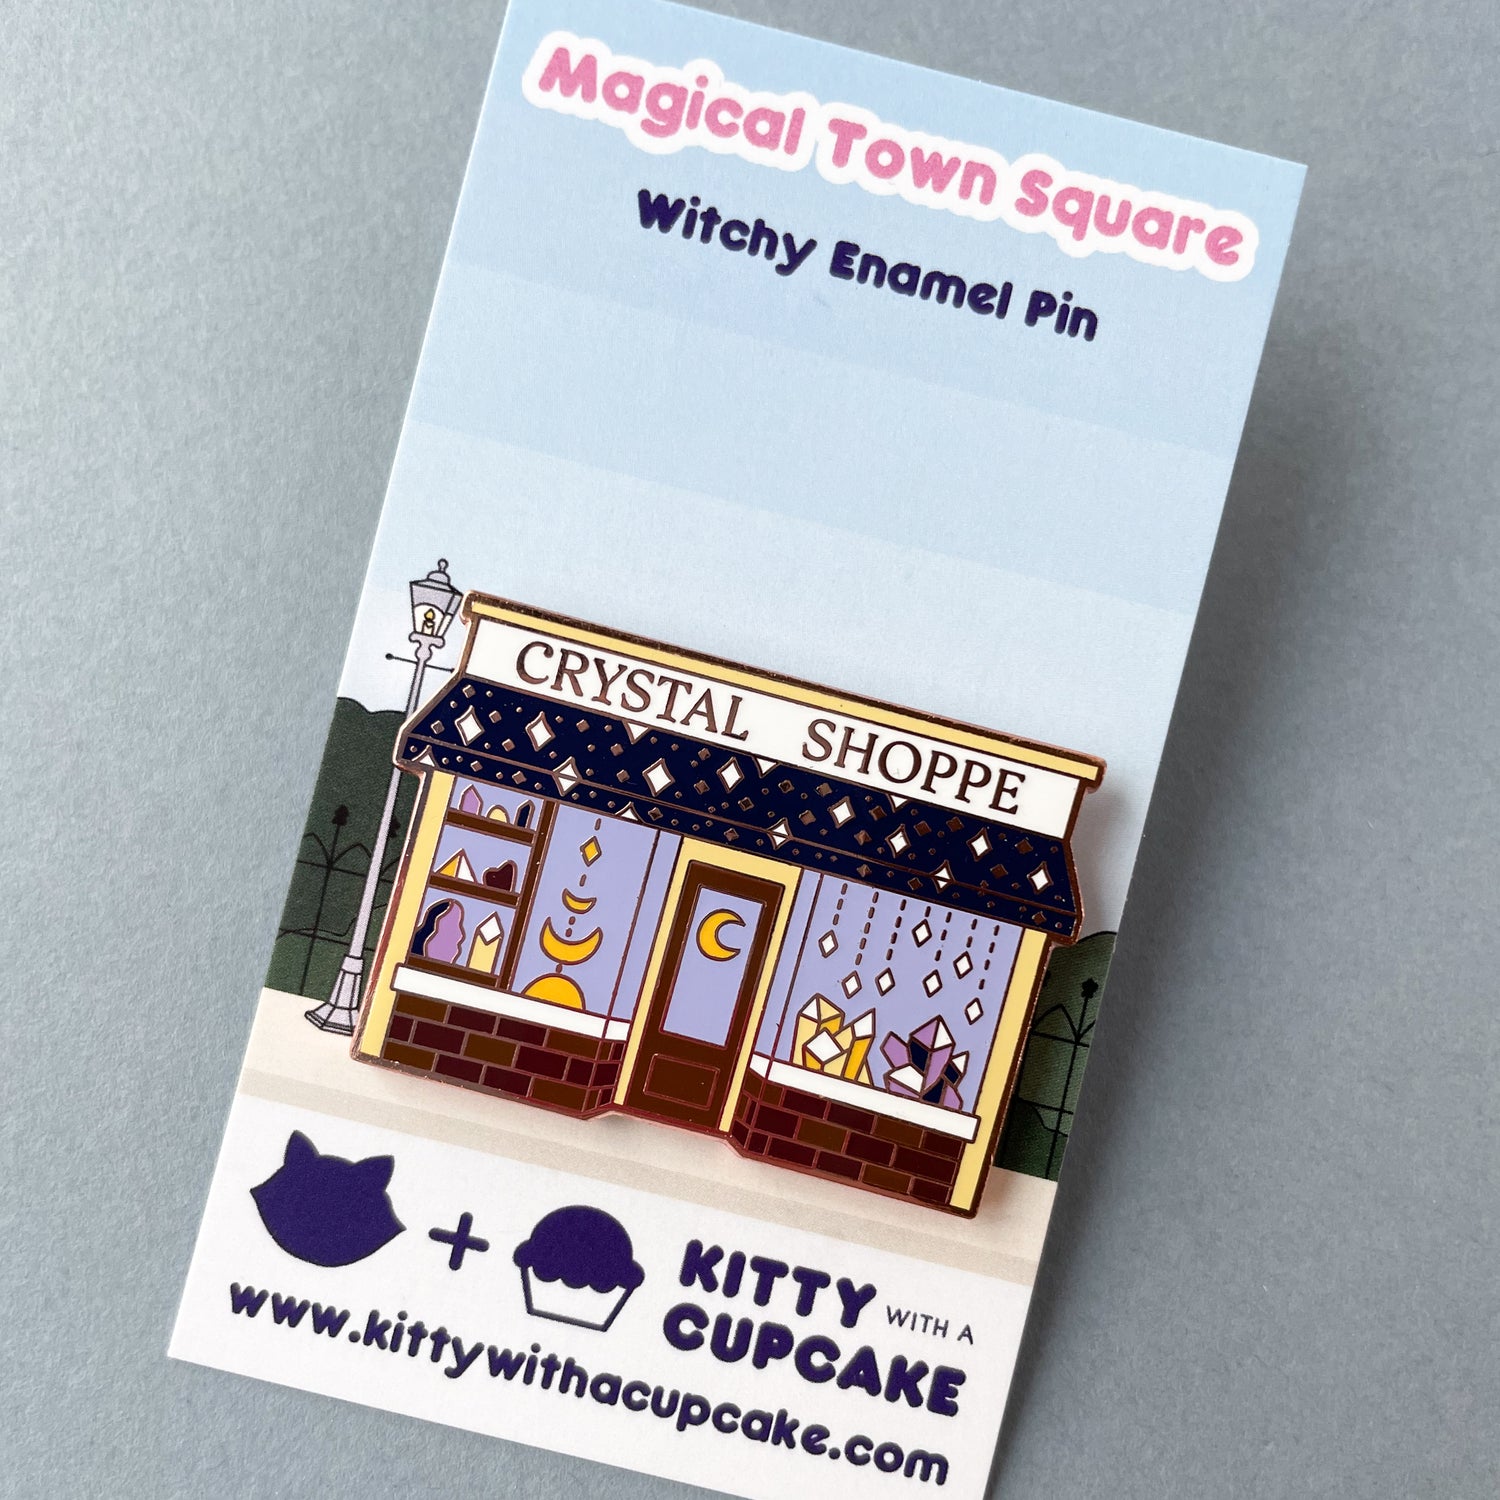 A Crystal Shoppe pin on a backing card that has an image of a street on it. 